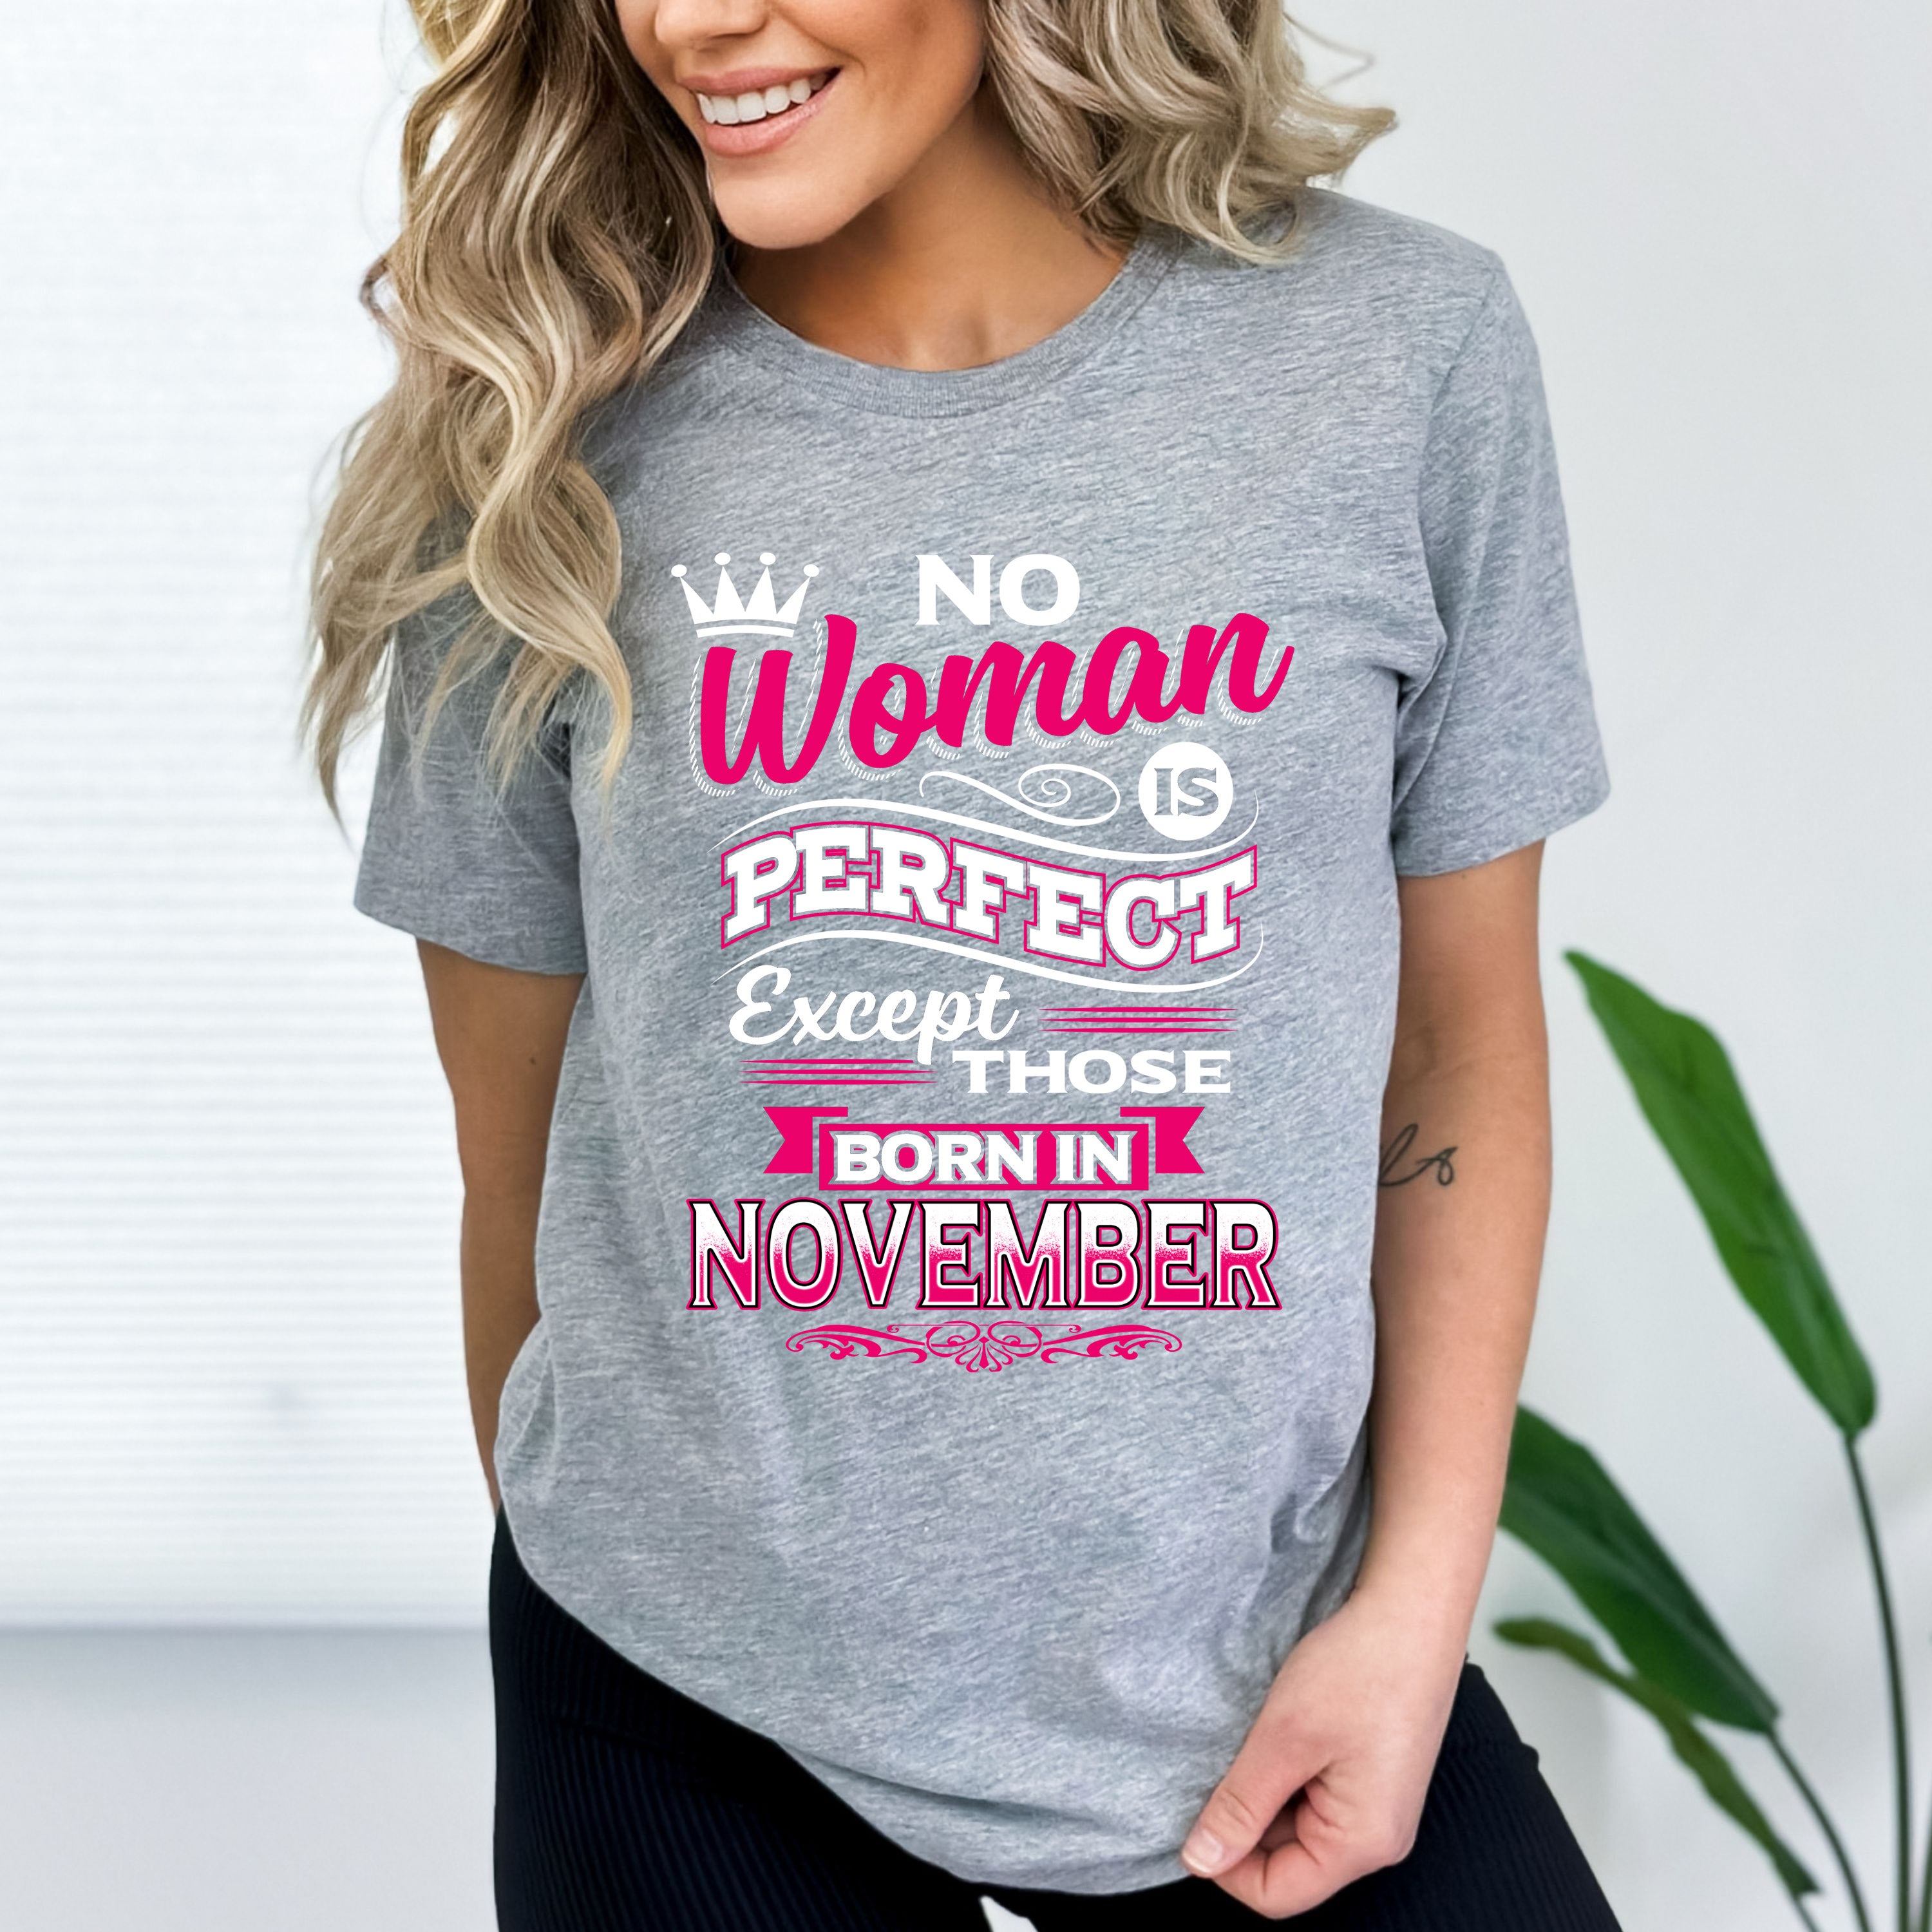 "No Woman Is Perfect Except Those Born In November"- Grey & Black